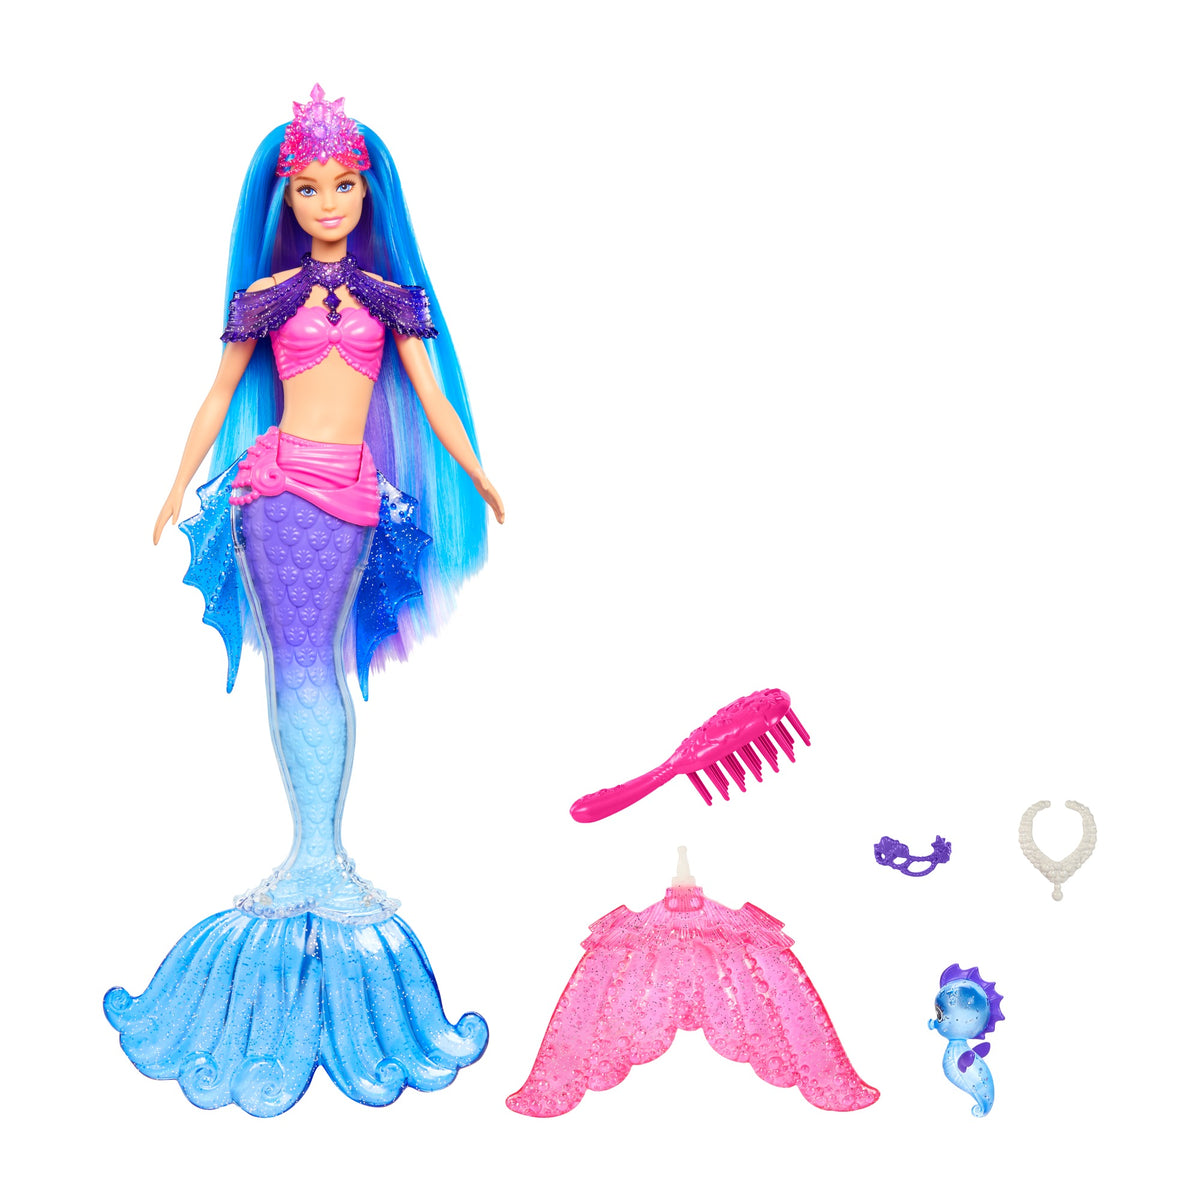 Barbie Mermaid Malibu Doll with Seahorse Pet and Accessories for Kids Ages 3+